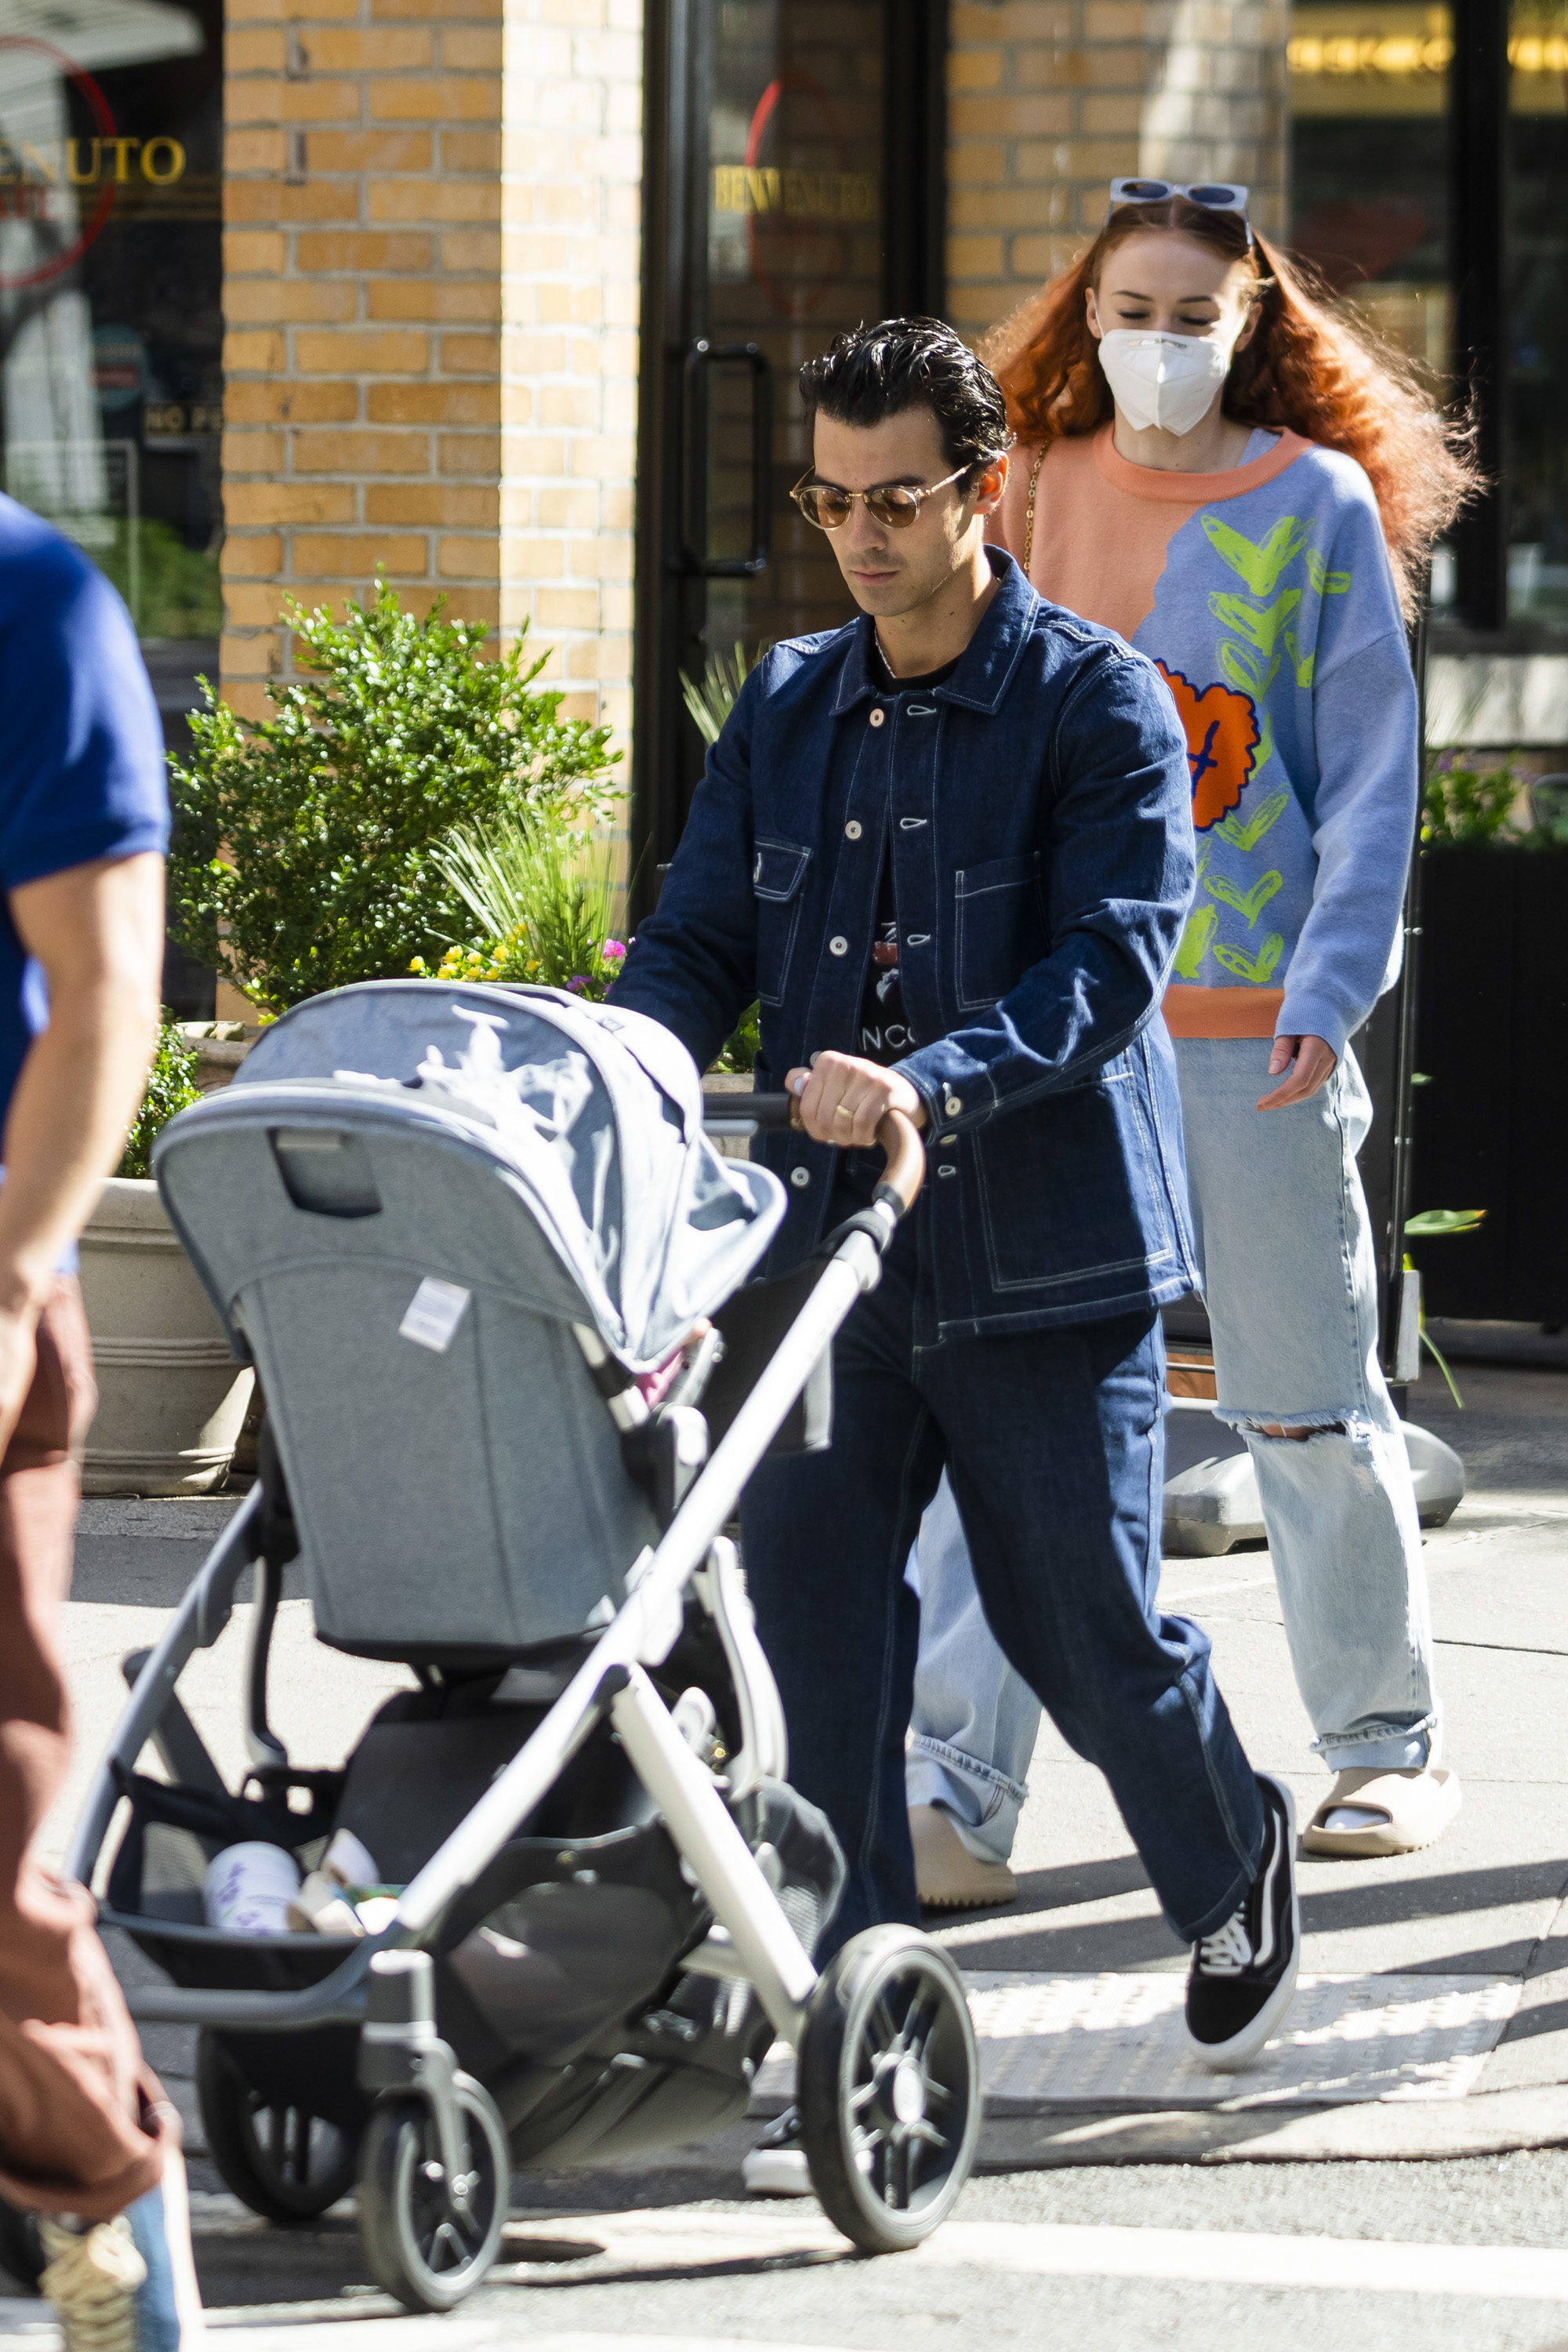 joe and sophie walking outside with joe pushing the baby stroller